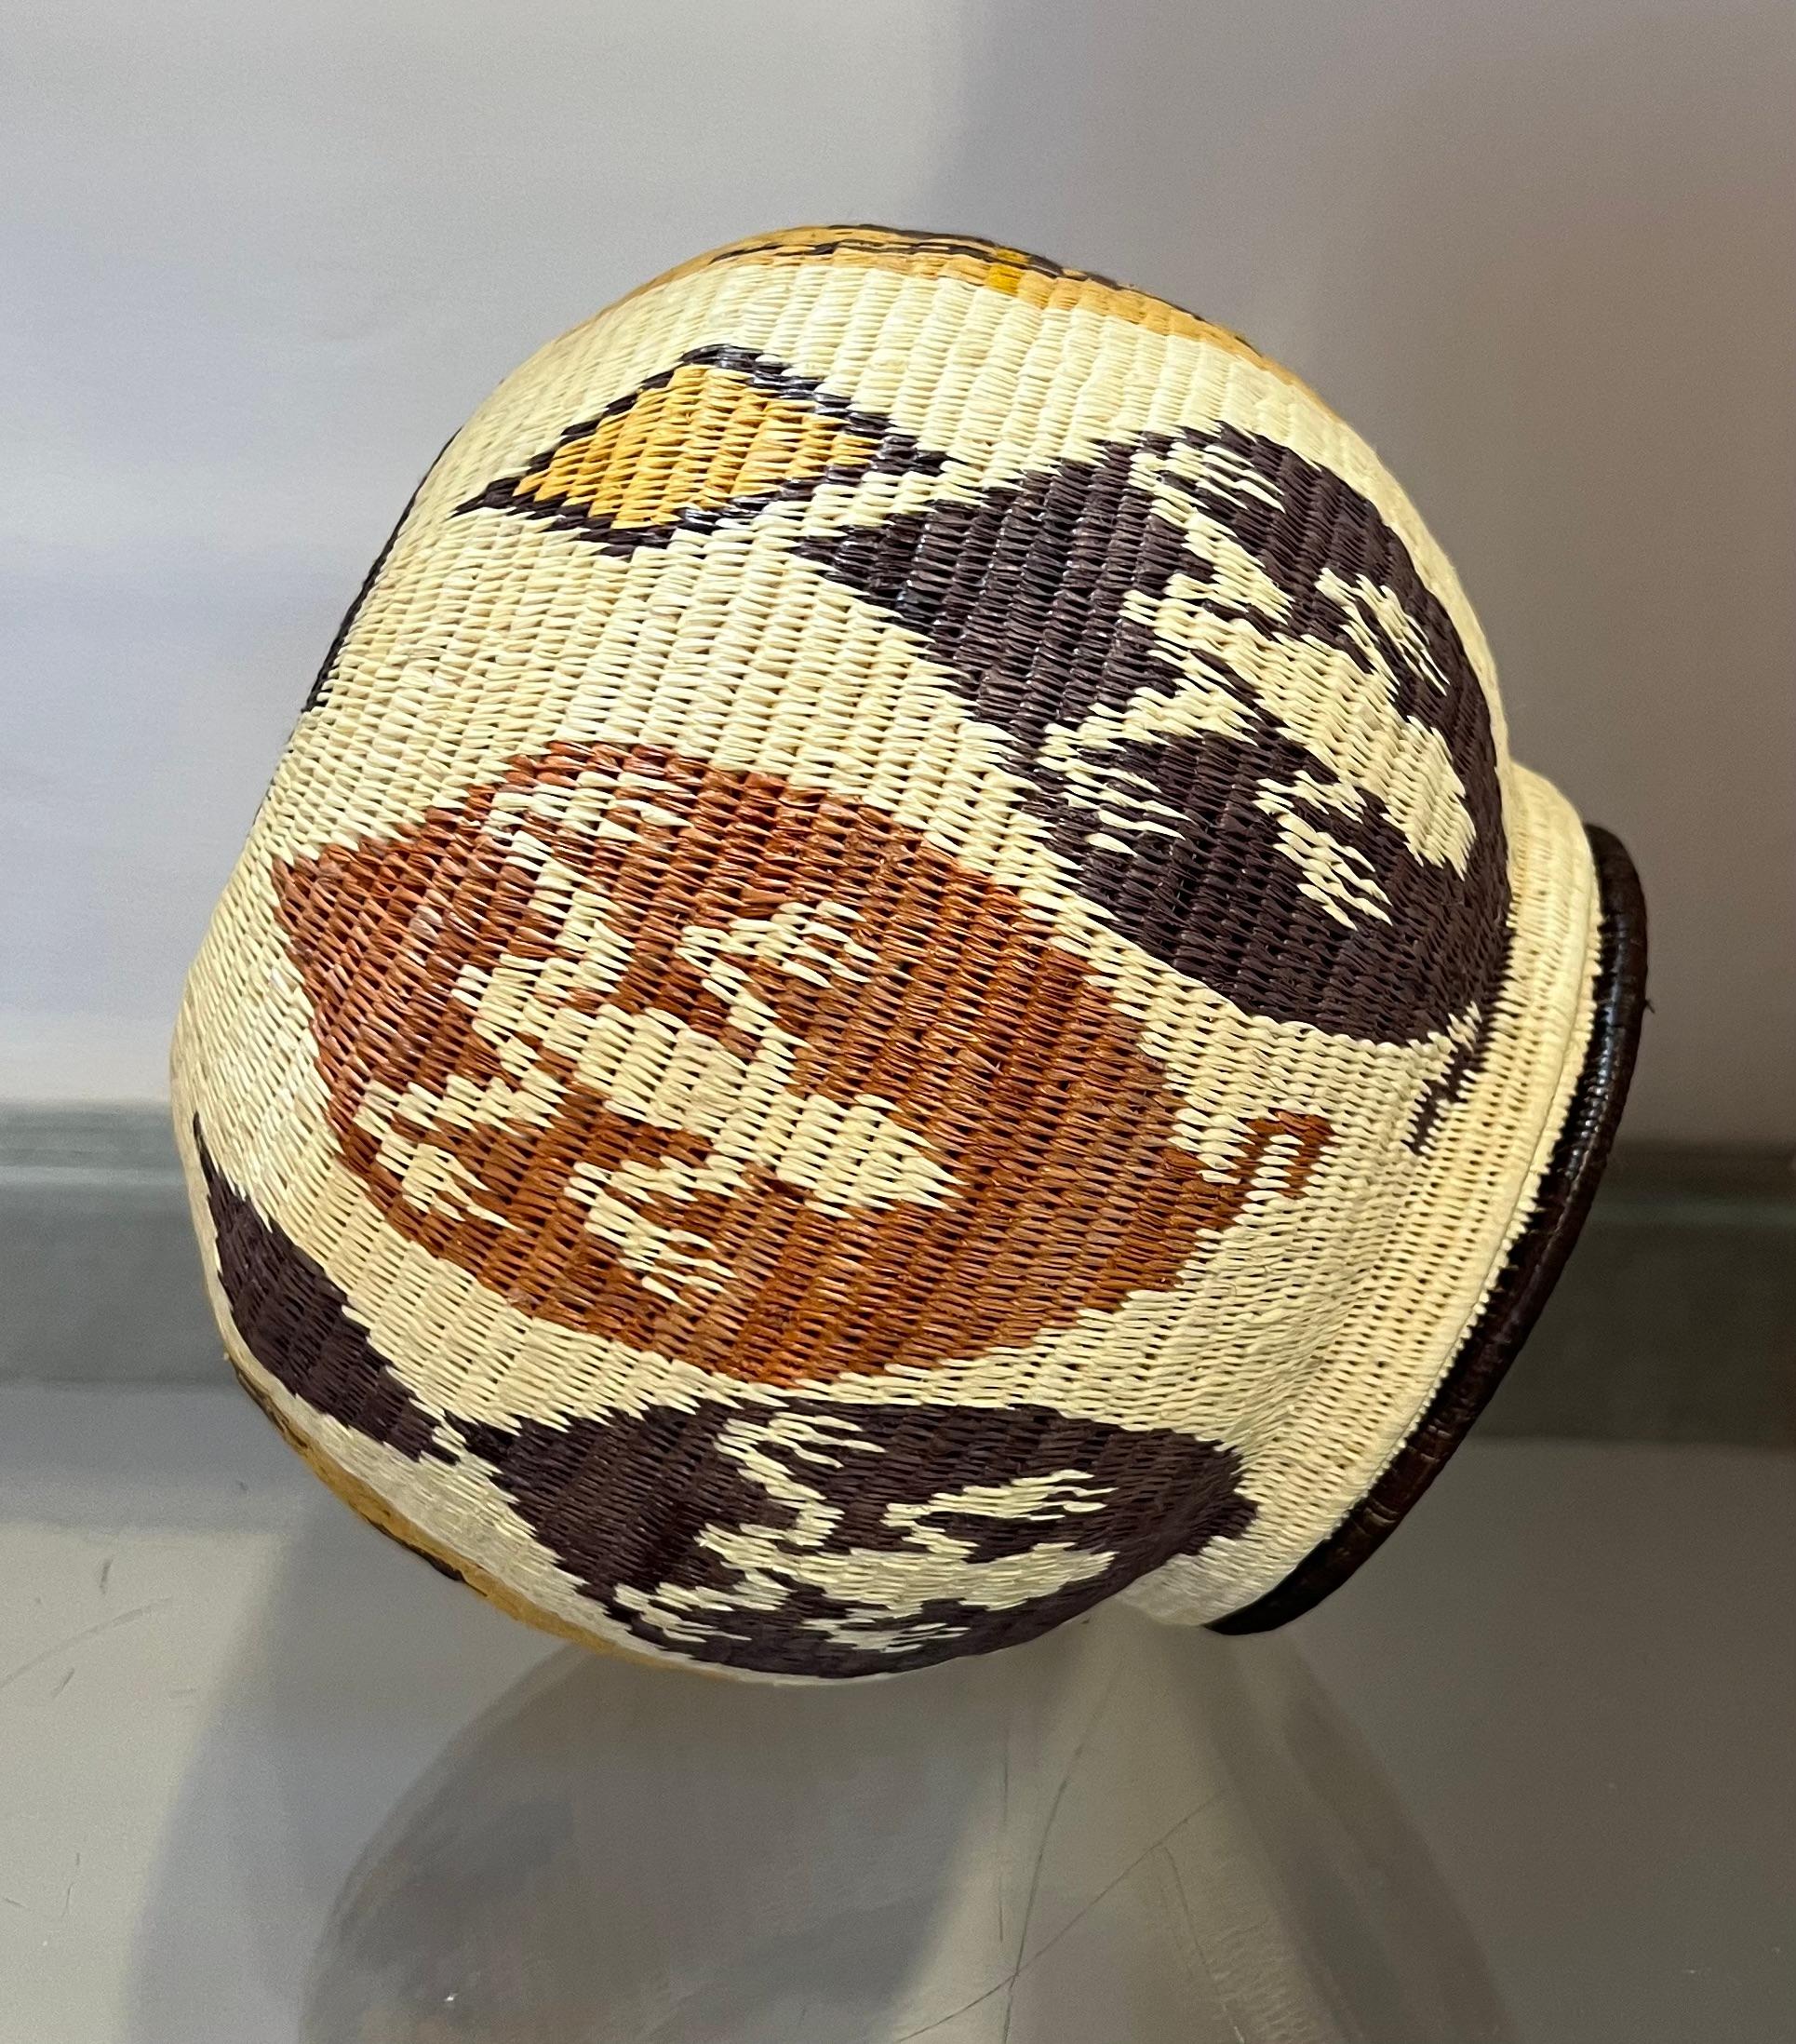 Frog and Spider Basket, Panama Rain Forest, Wounaan Tribe, handwoven, white, red For Sale 3